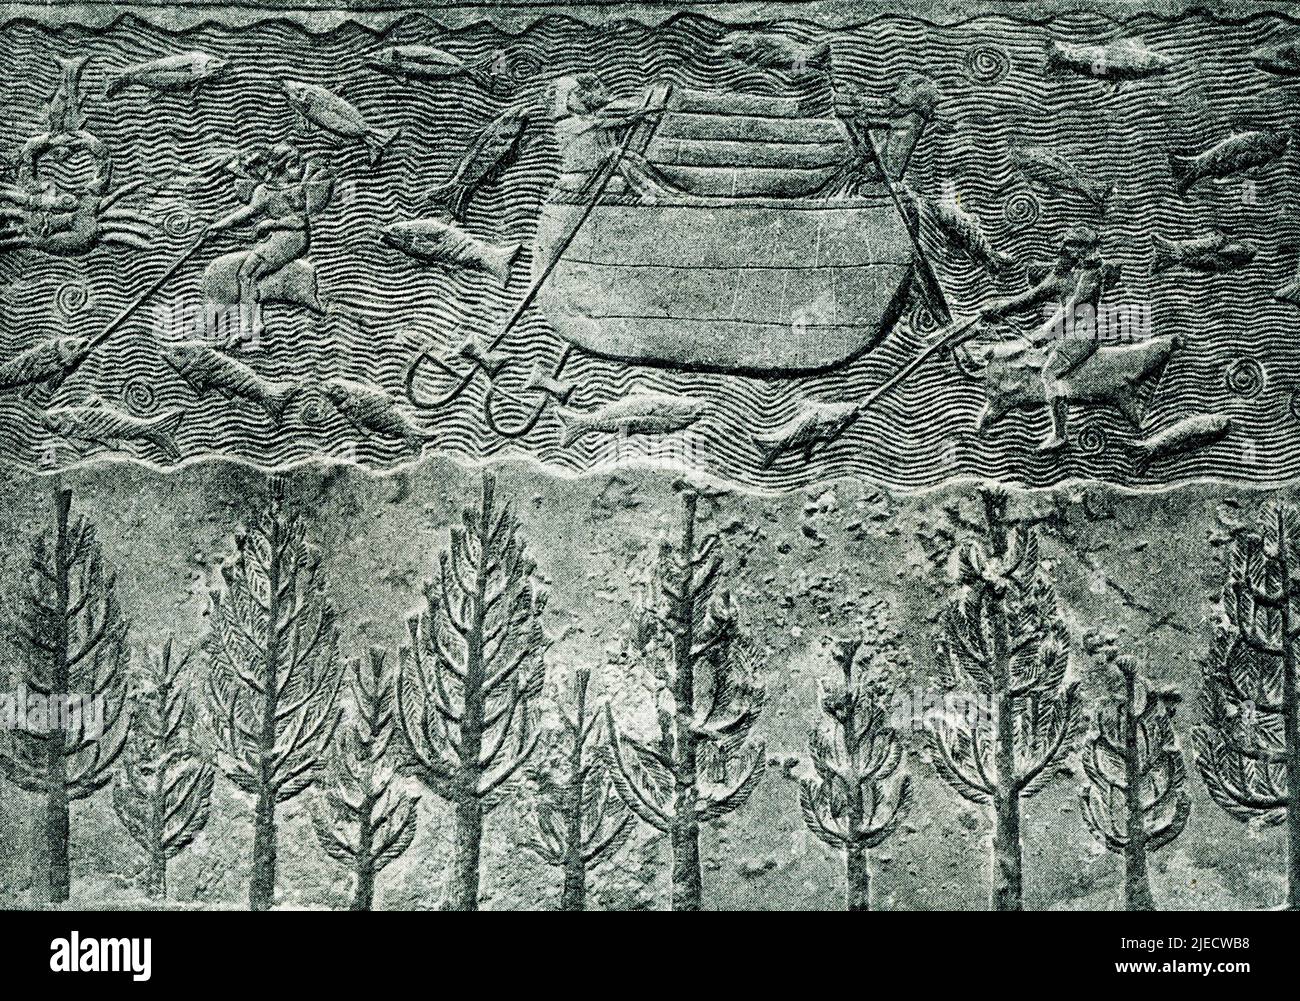 This 1910 image shows  a wall panel relief in the South West Palace at Nineveh at the time of the Assyrian ruler Sennacherib. It shows coracles on the river bringing materials and passing some fishermen who float on inflated skins. The full relief shows a sculpture of a human-headed winged bull for Sennacherib's palace. The bull is on a sledge, with three officers standing on the bull, one holding a trumpet. Workers bring equipment including saws, hatchets, picks and shovels. The time period of its making is 700-692 BC. Stock Photo